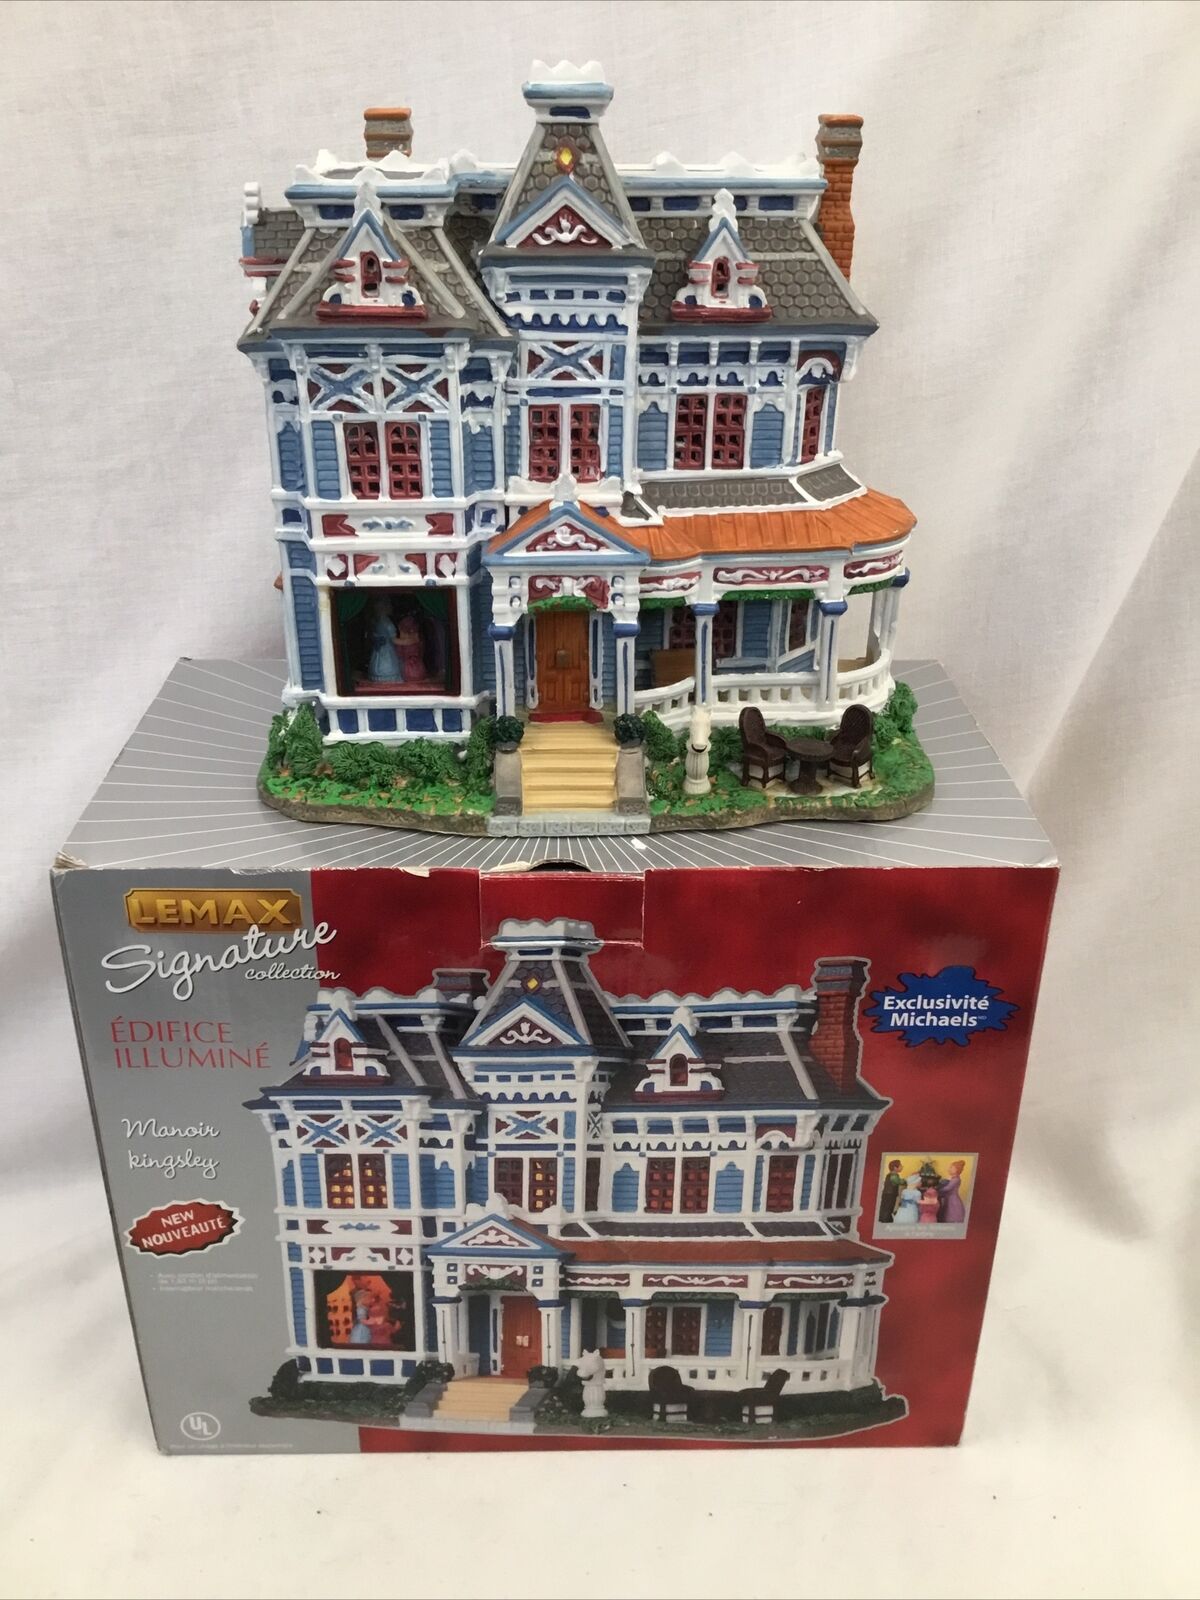 2009 Lemax KINGSLEY MANOR Signature Collection Christmas Village House NO CORD